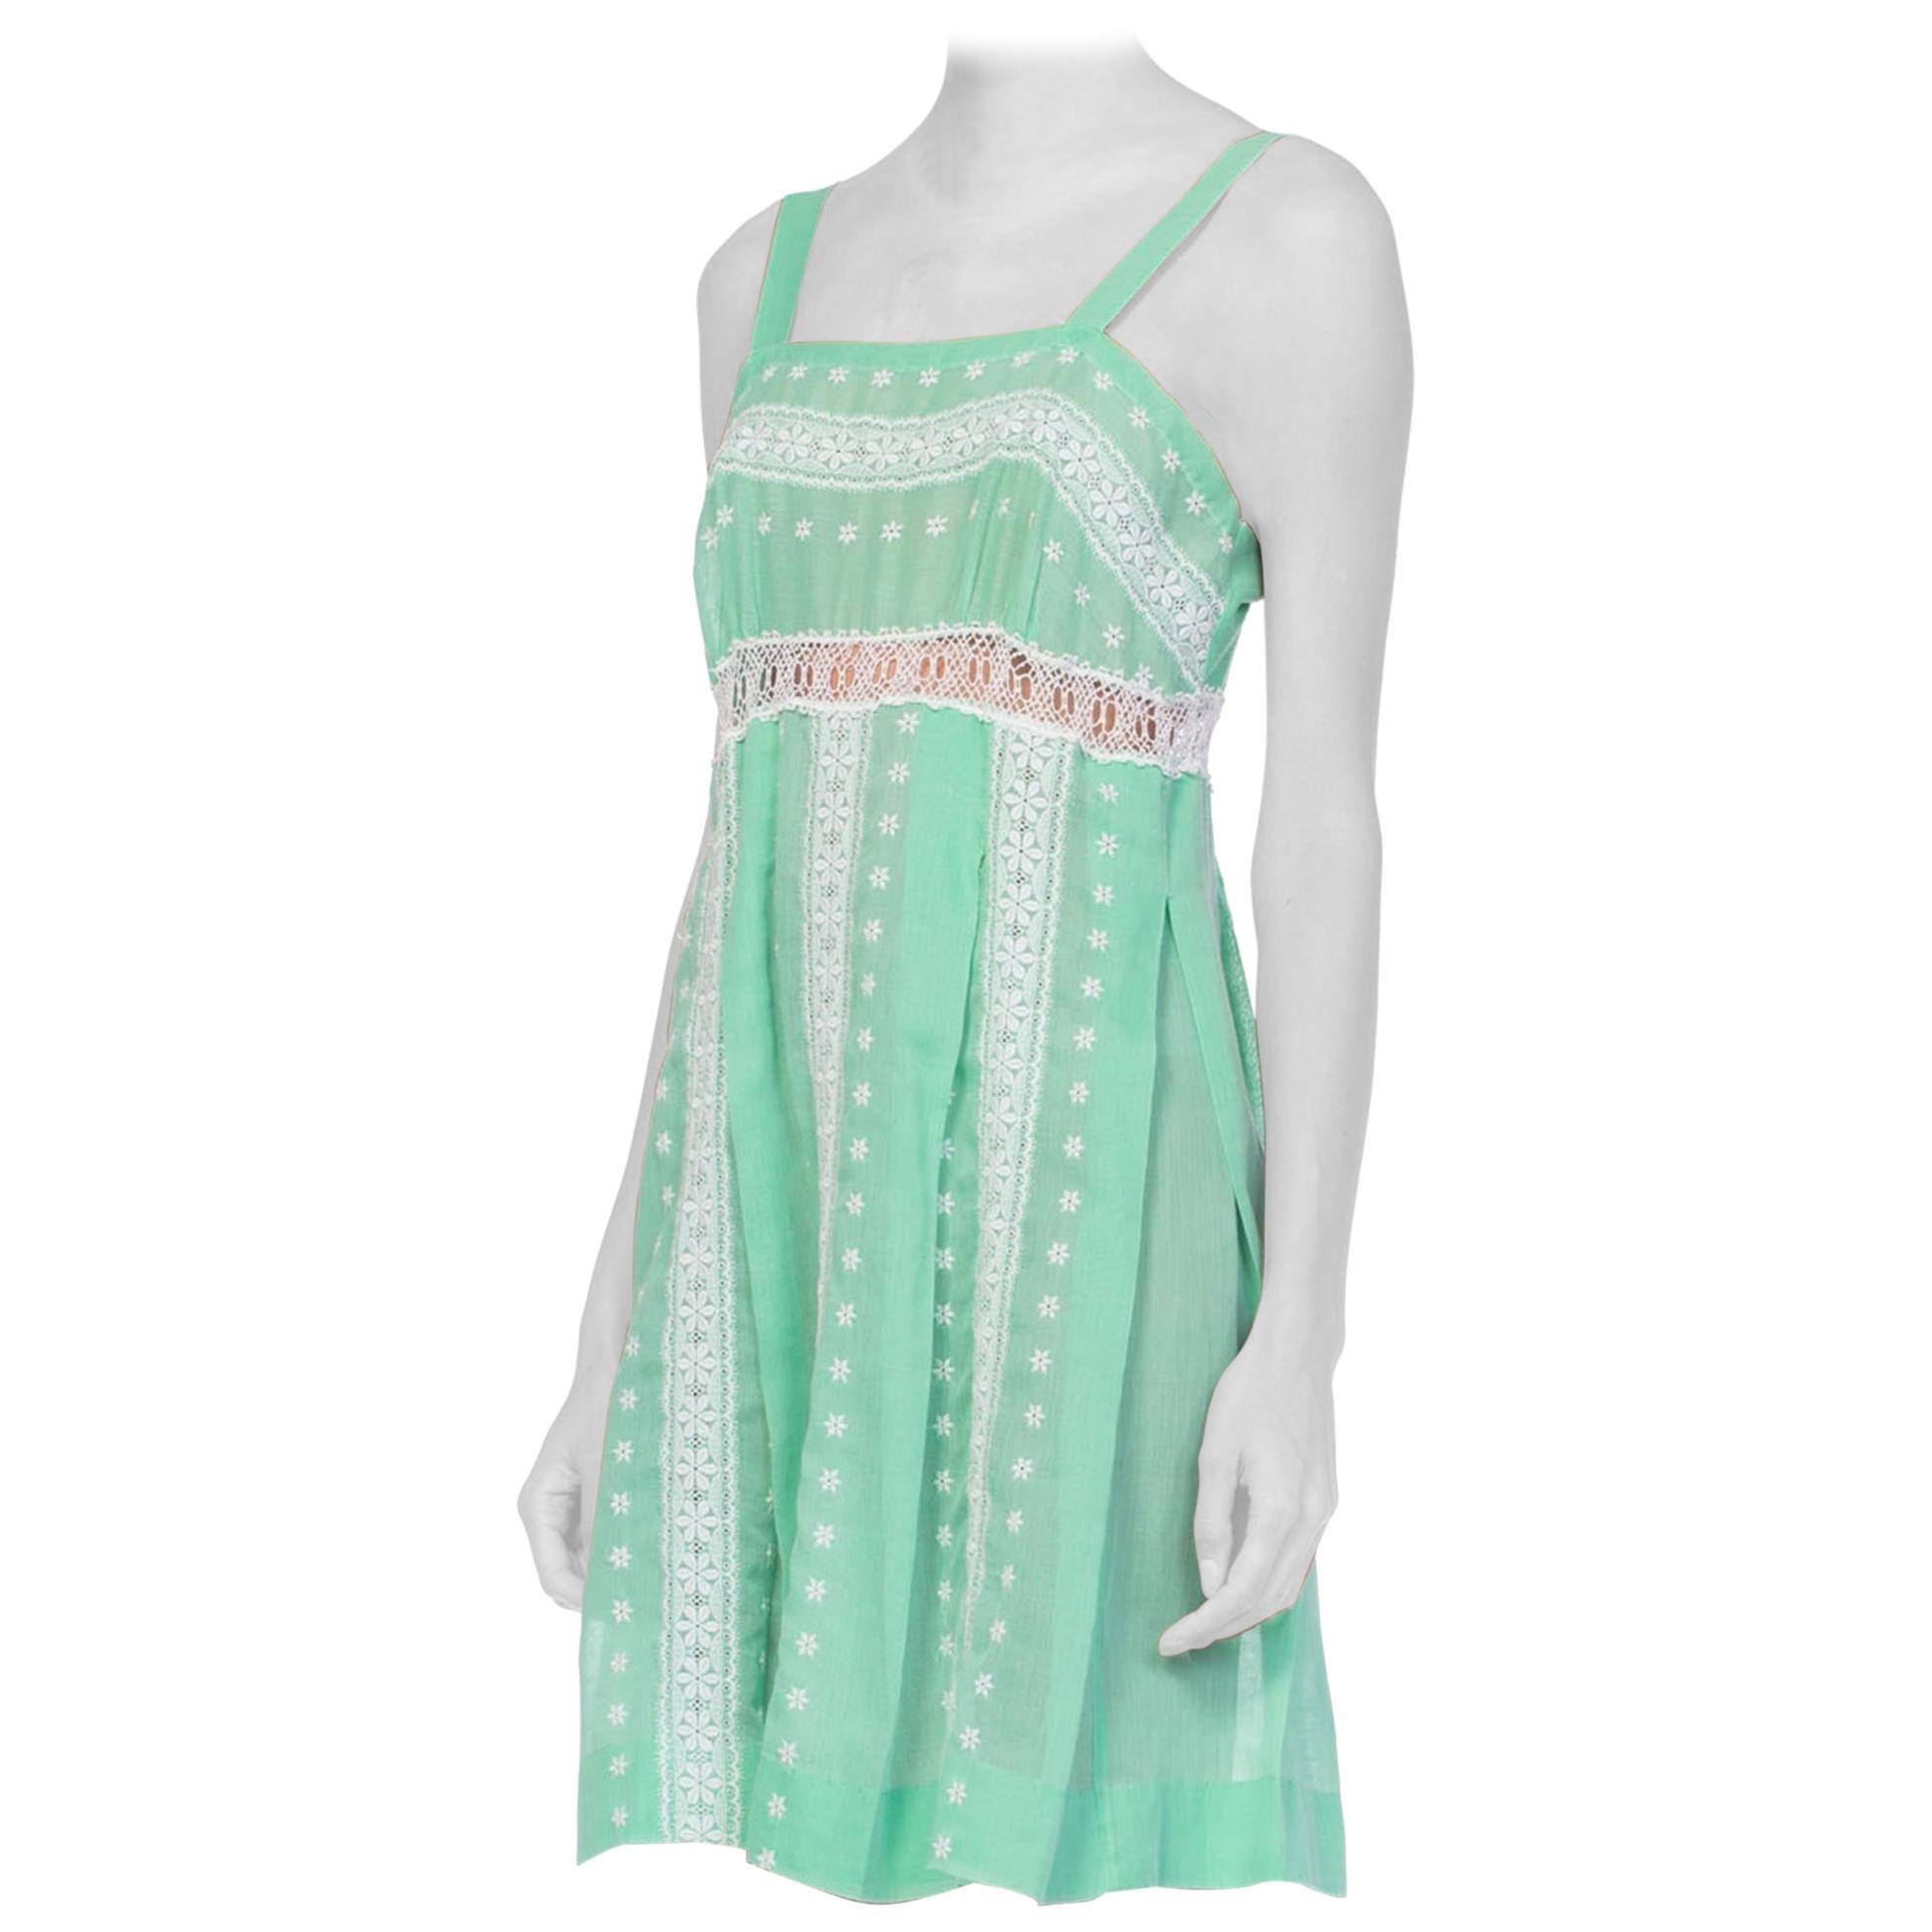 1960S Mint Green Cotton Blend Dress With Eyelet Lace Style Embroidery For Sale